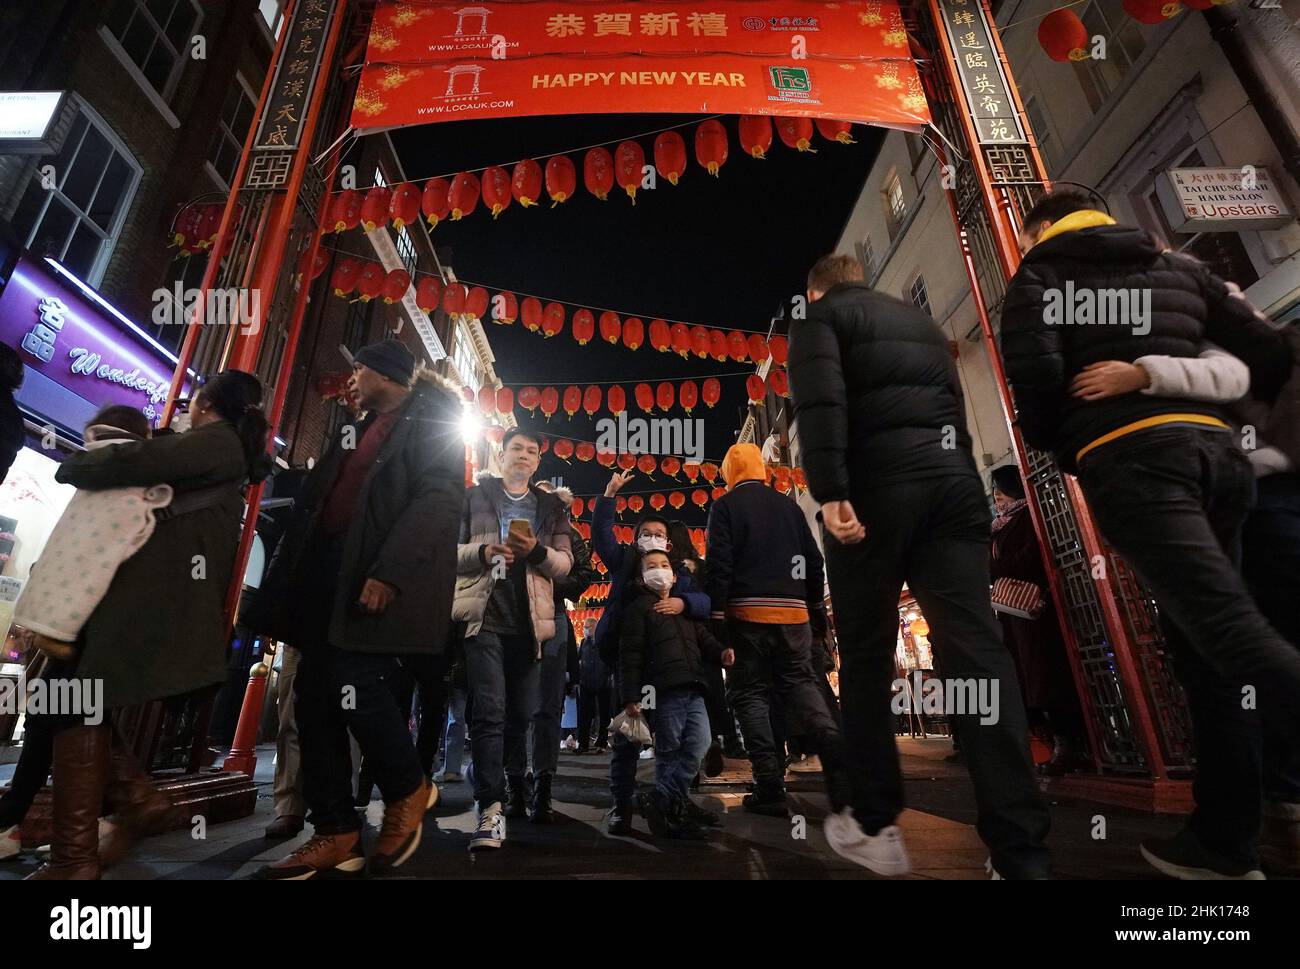 Children posing for a picture underneath one of the gates in Chinatown, London, celebrating the Lunar New Year. The Lunar New Year - beginning on February 1 - is the start of a two-week celebration and is the most important holiday for millions of people around the world. Picture date: Tuesday February 1, 2022. Stock Photo